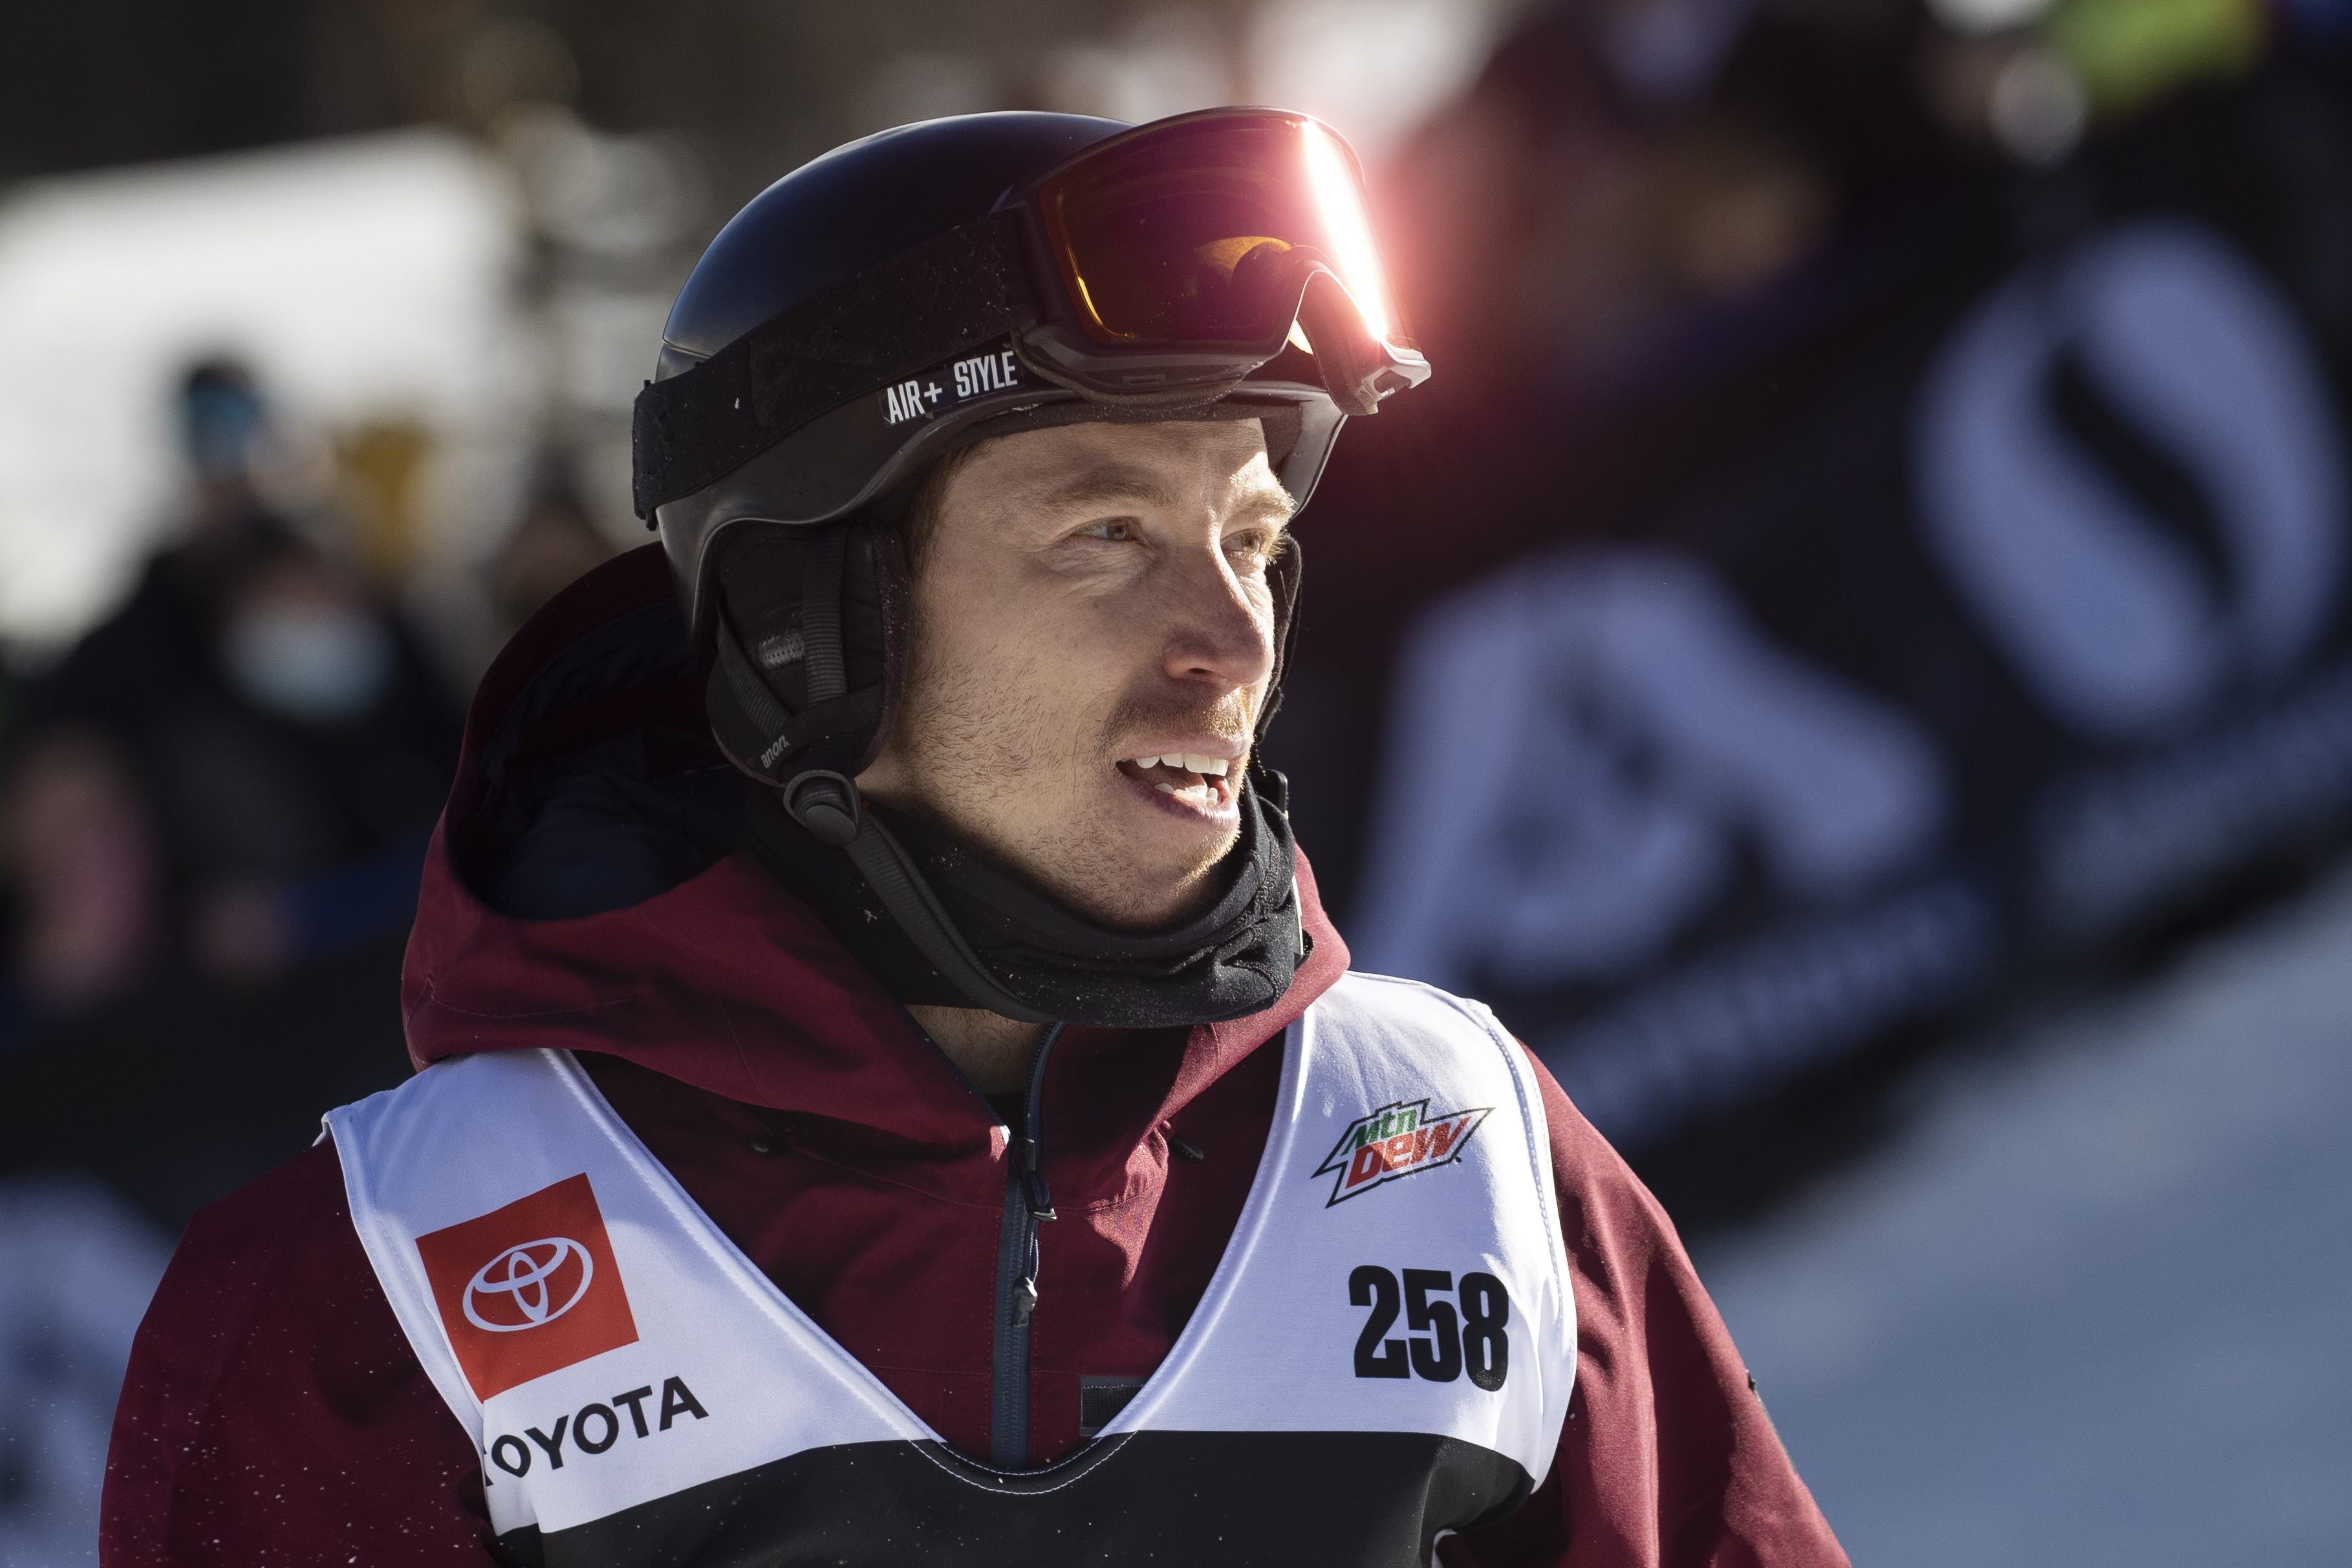 What To Know About Winter Olympic Snowboarder Shaun White